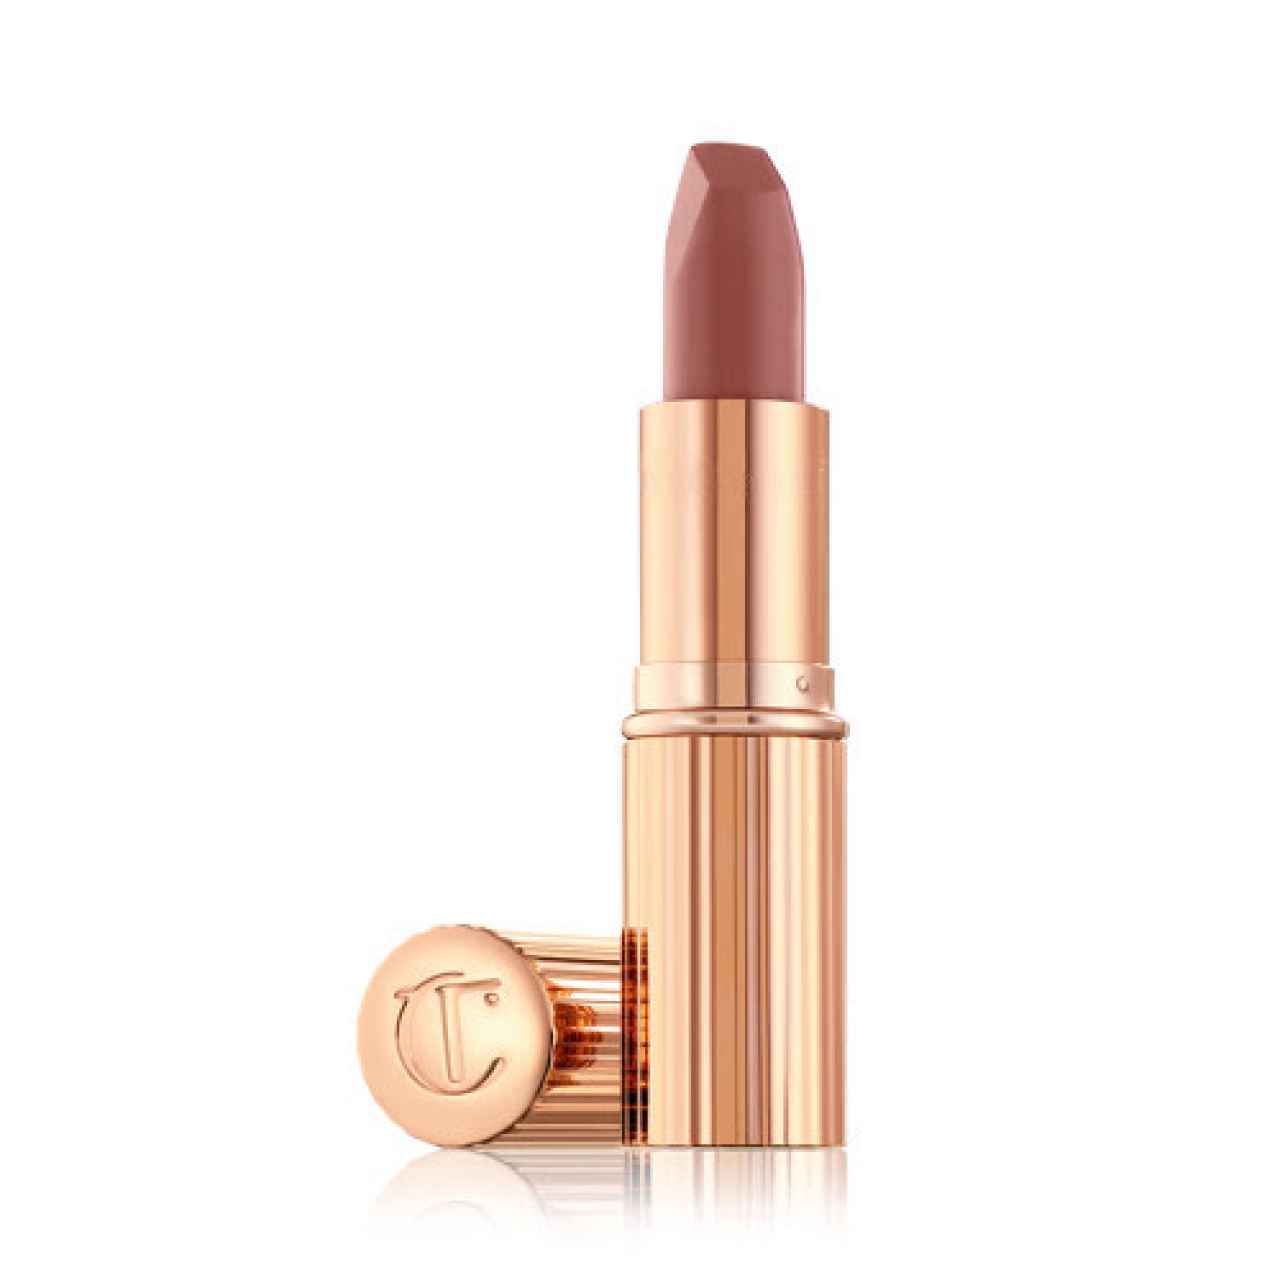 Matte Revolution in the shade Very Victoria, by Charlotte Tilbury (€32).